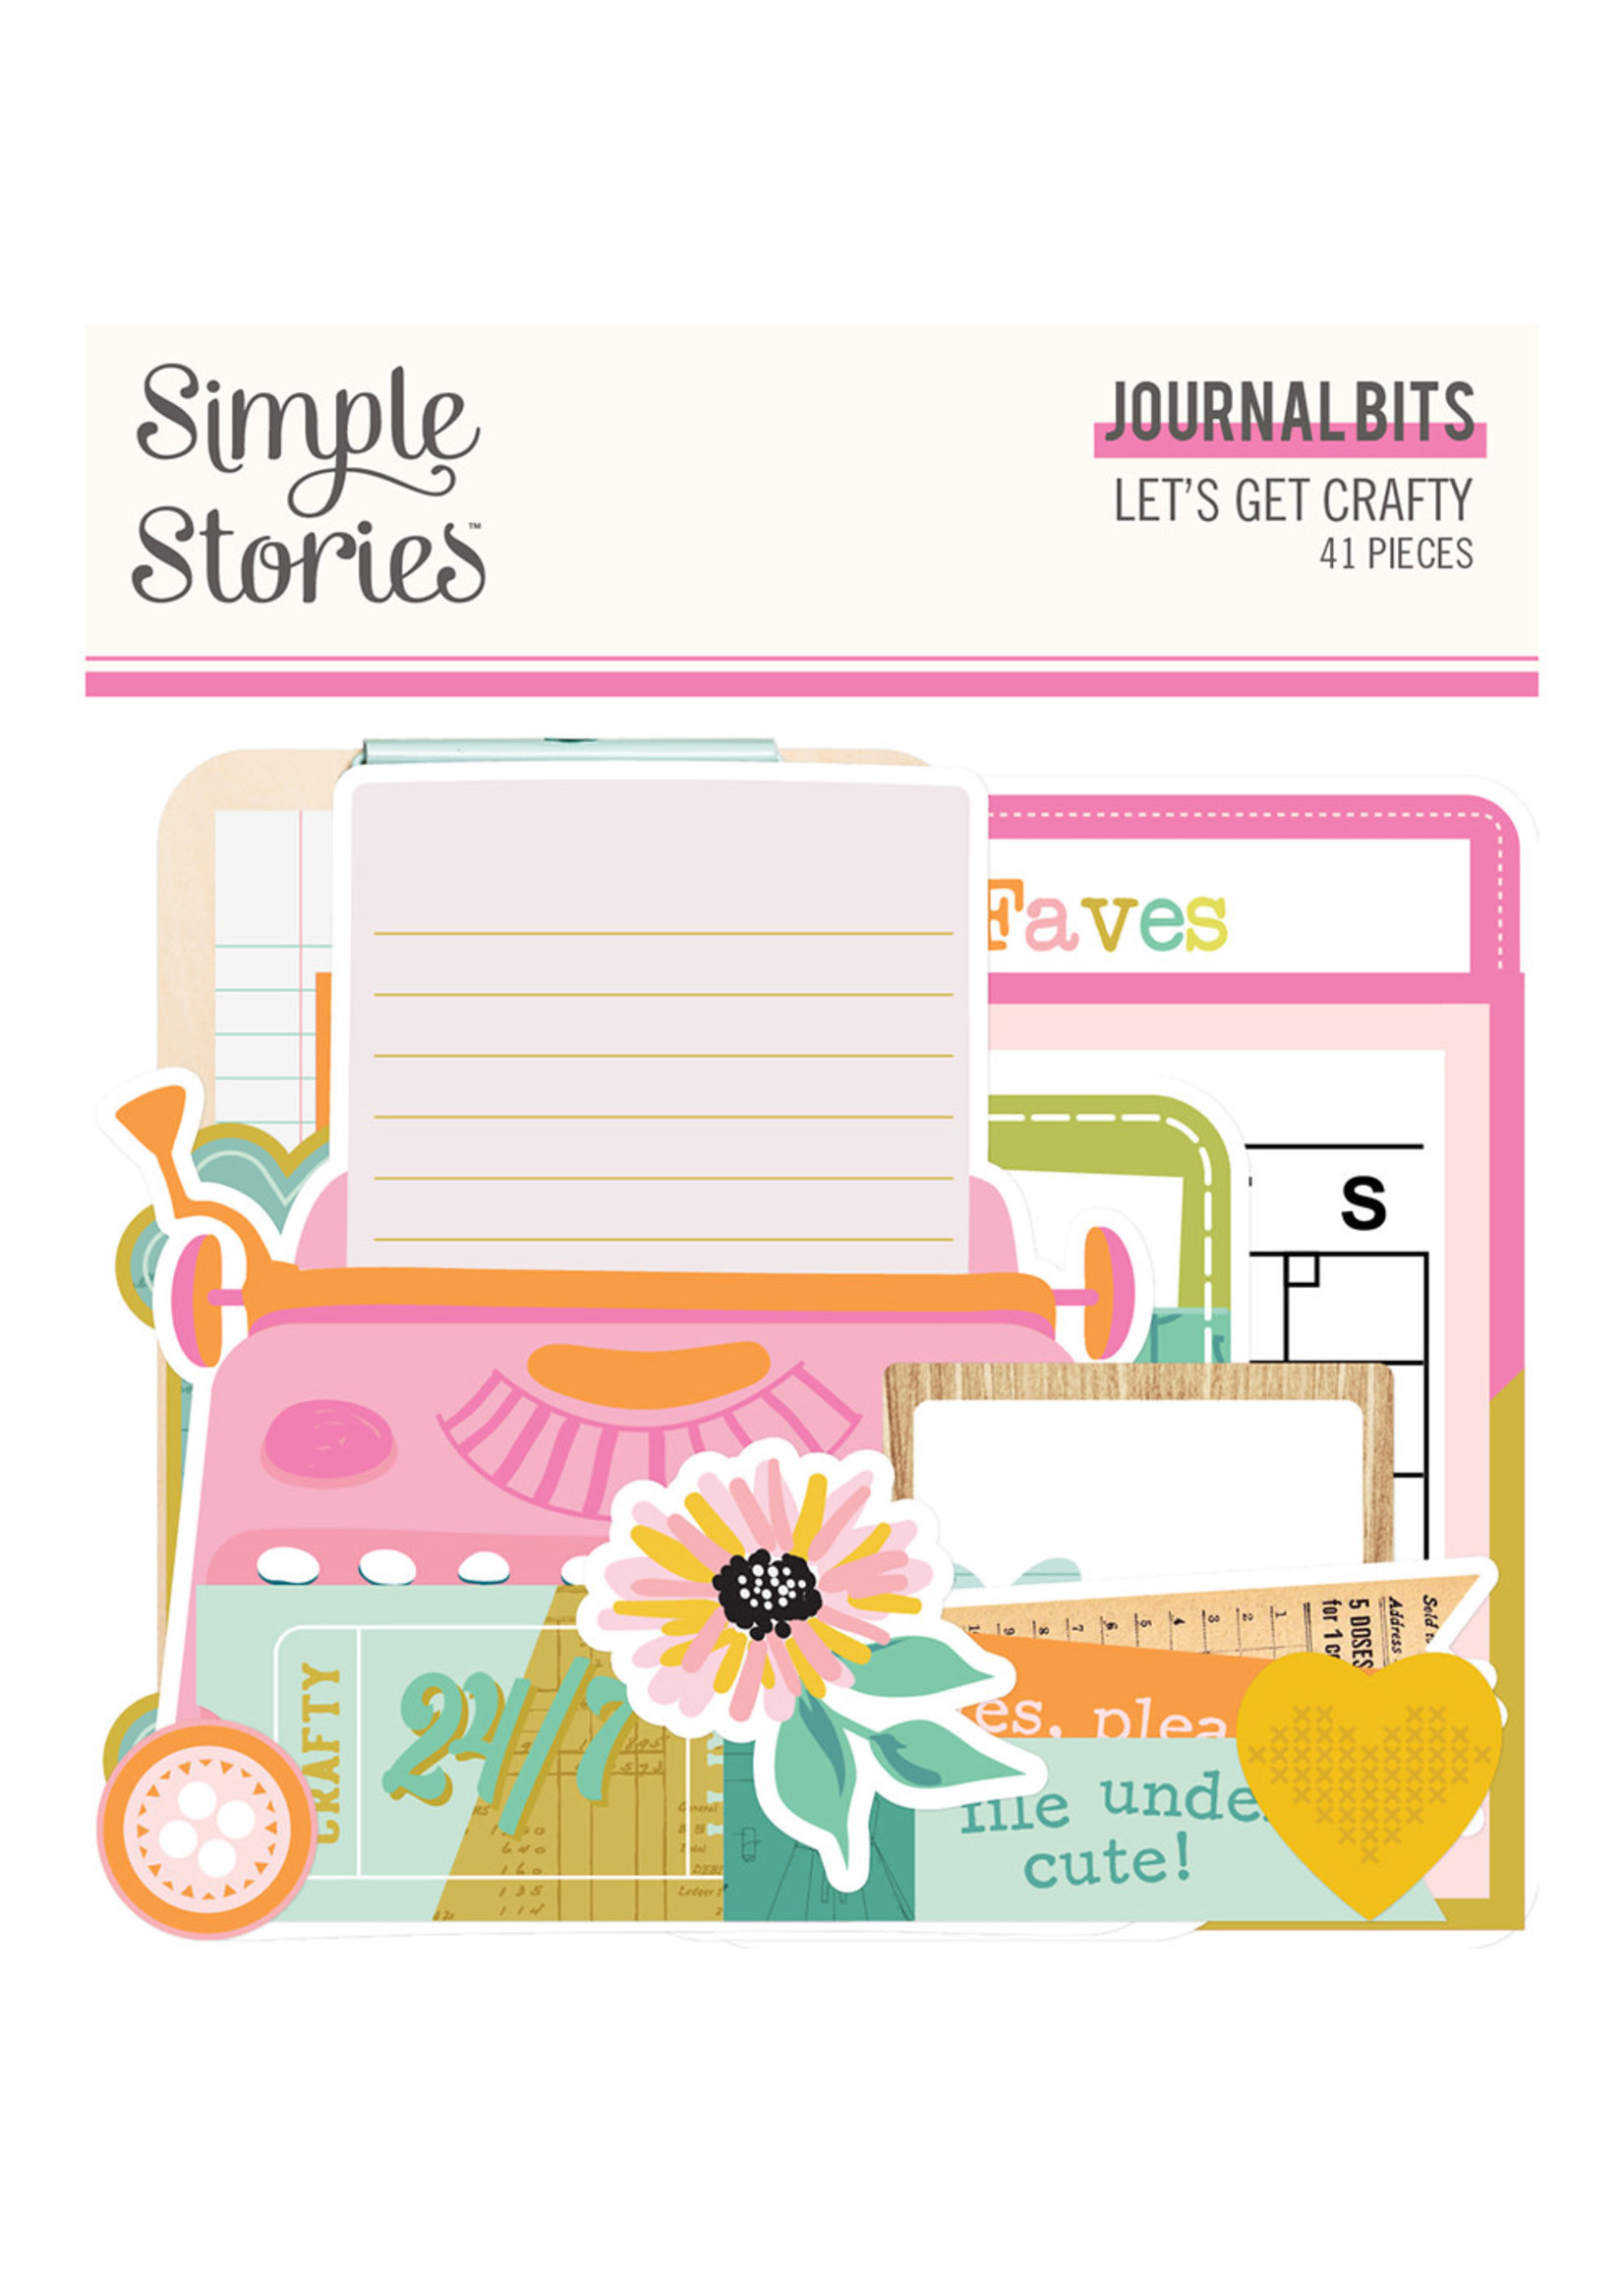 Simple Stories Let's Get Crafty - Journal Bits